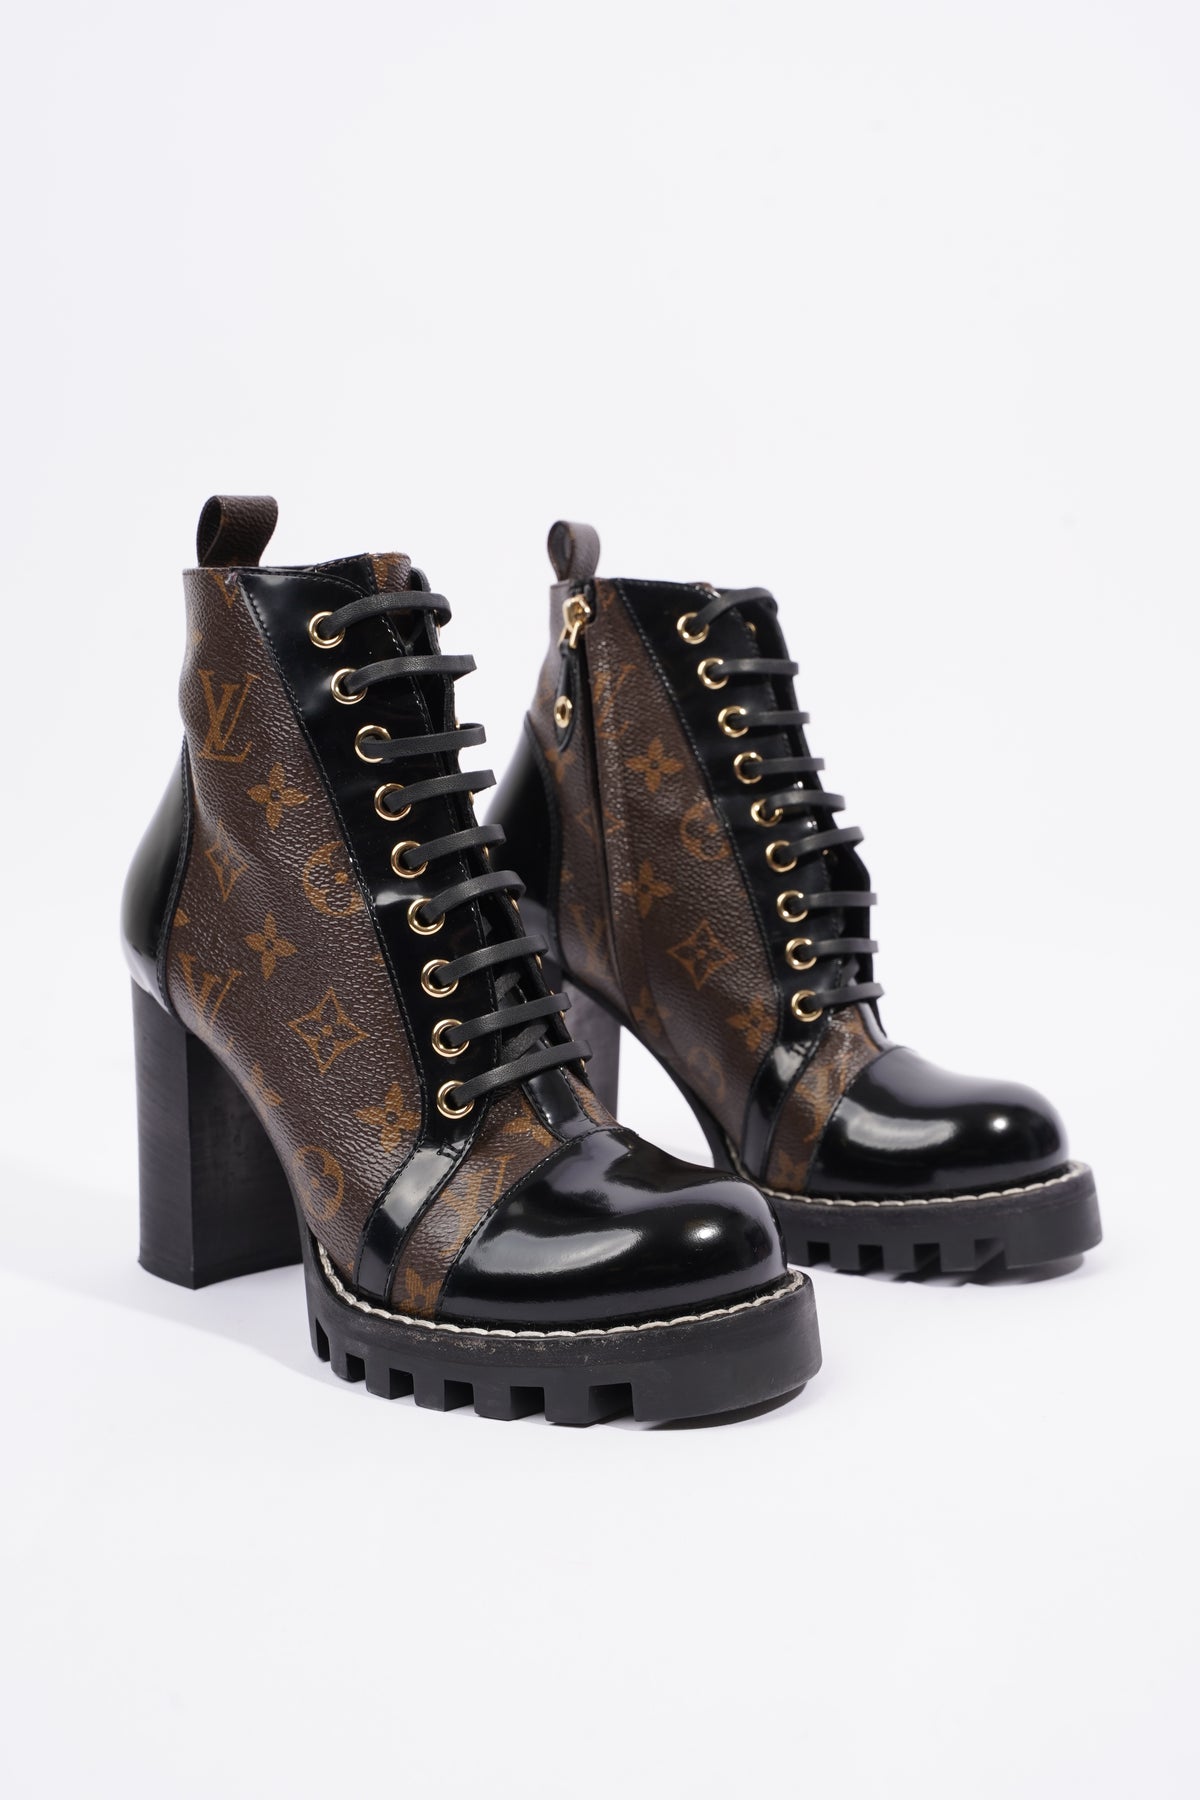 Used Louis Vuitton Monogram Star Trail Ankle Combat Boots 9